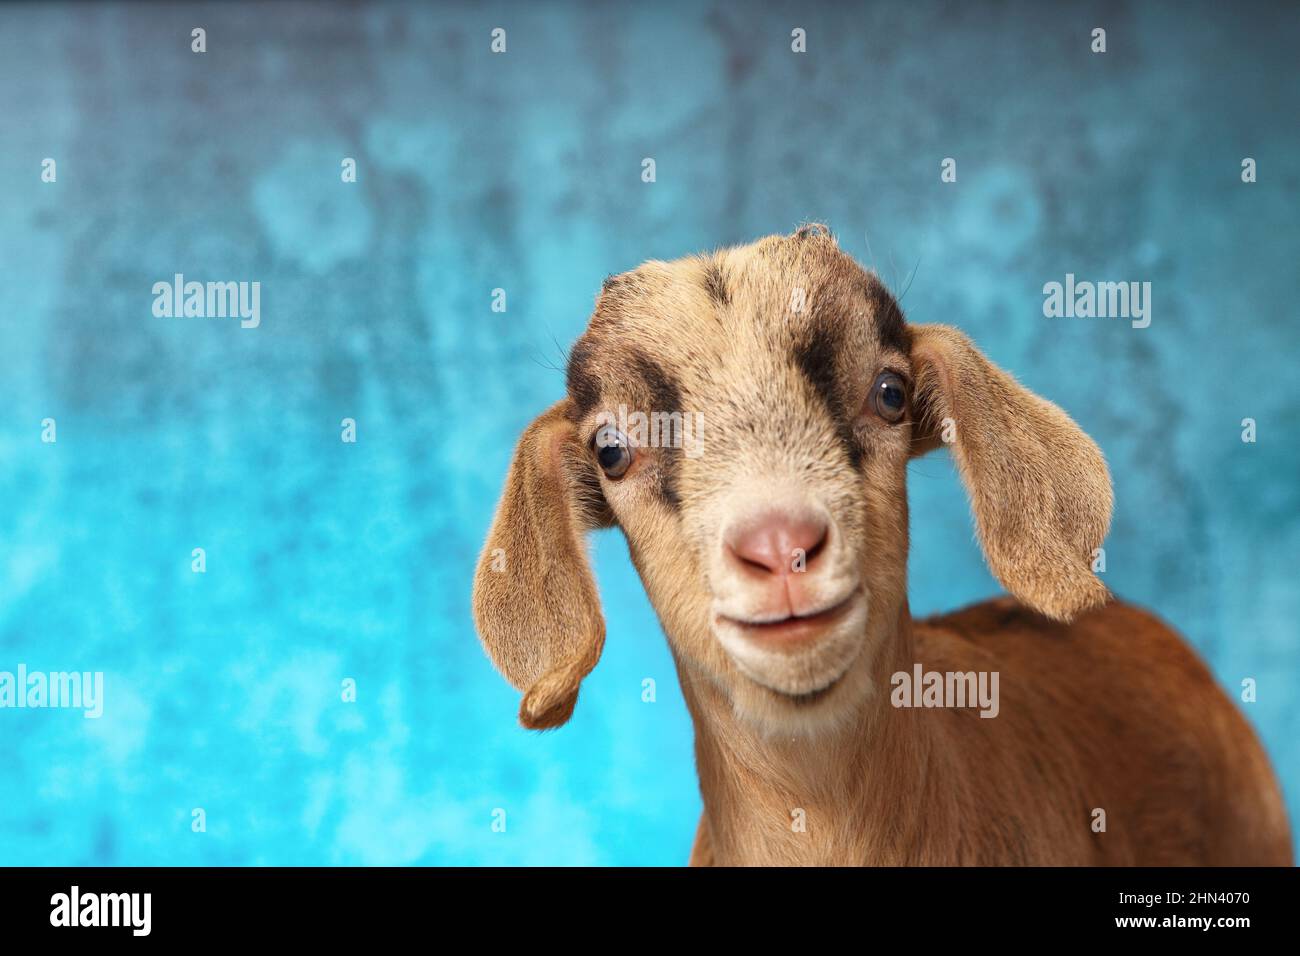 Domestic goat. Portrait of kid, seen against a blue background. Germany Stock Photo